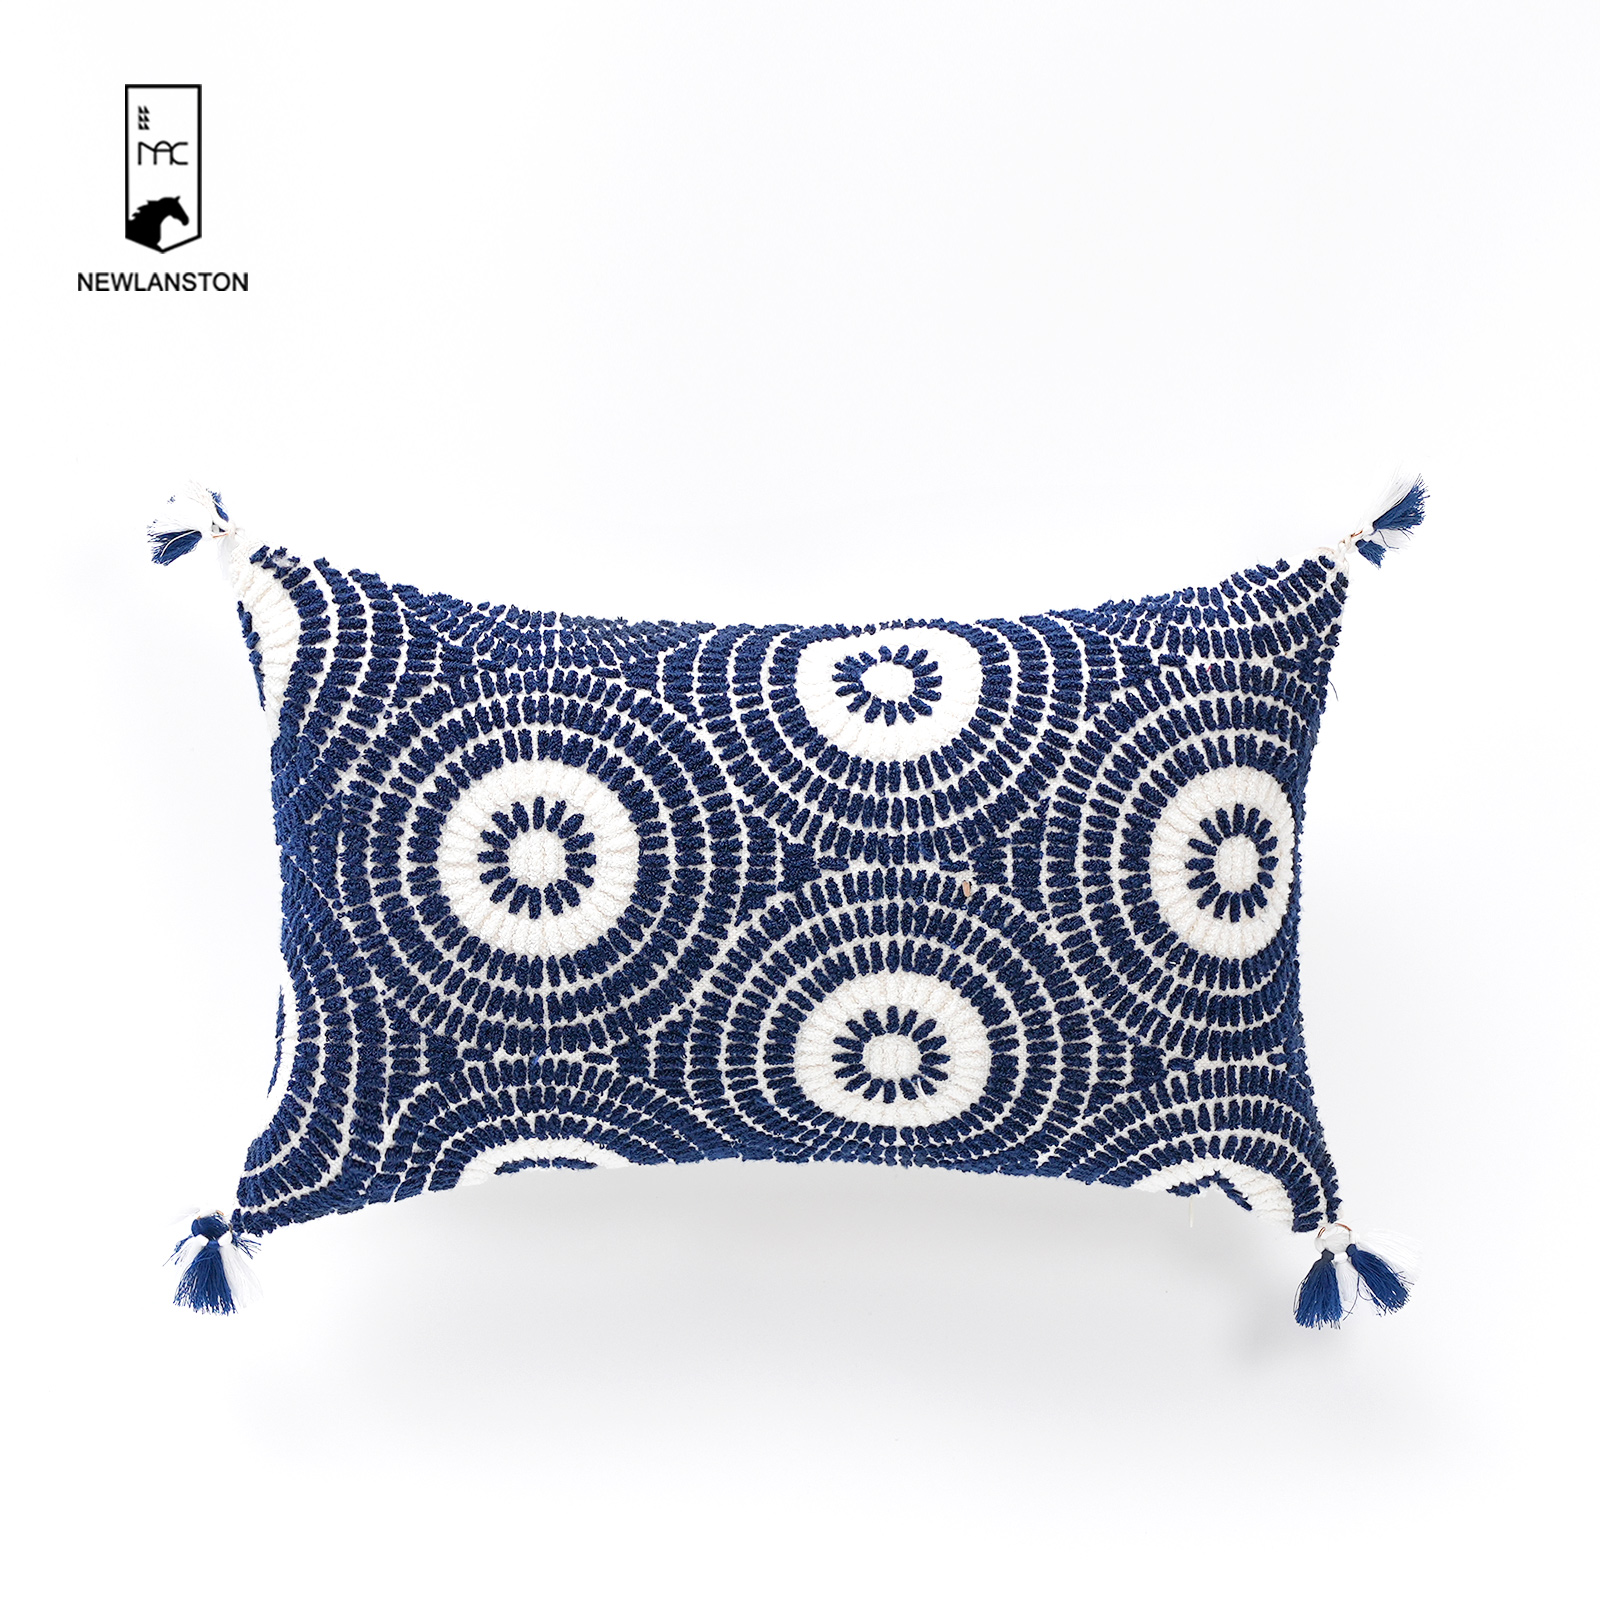 50x30 Embroidery Geometric Style Cushion/Pillow cover